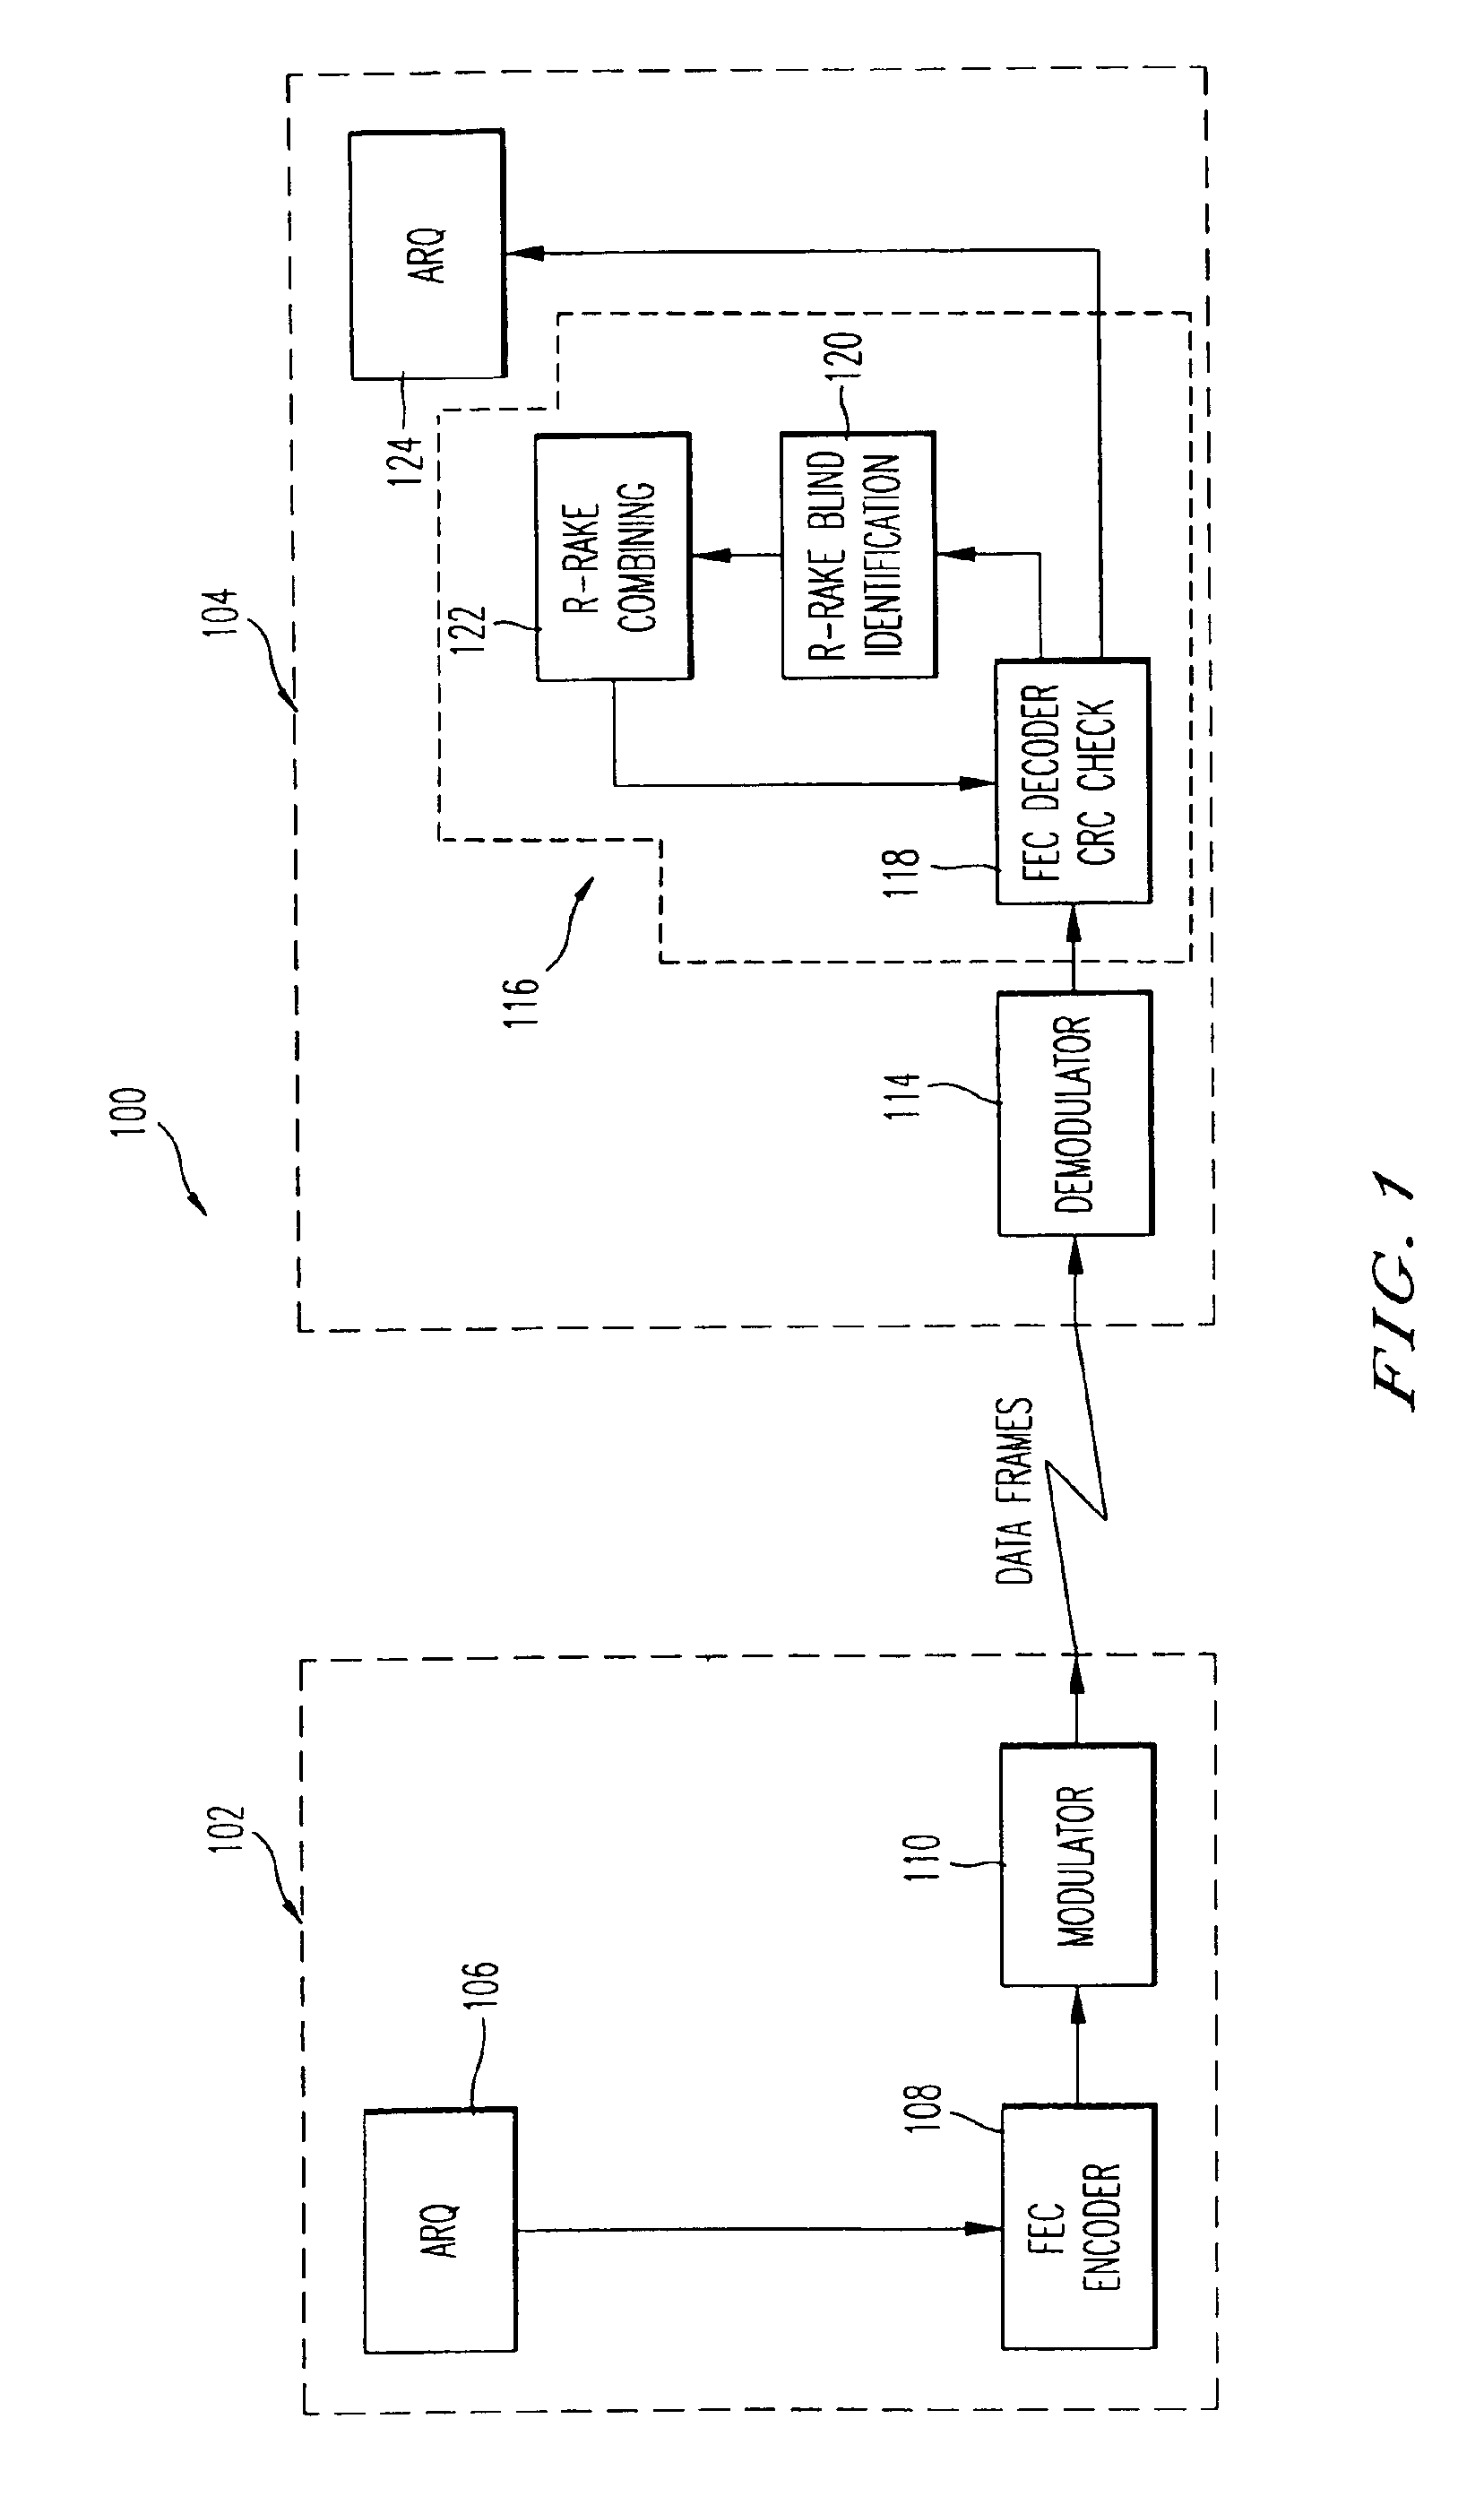 System and method for transmitting data in frame format using an R-Rake retransmission technique with blind identification of data frames